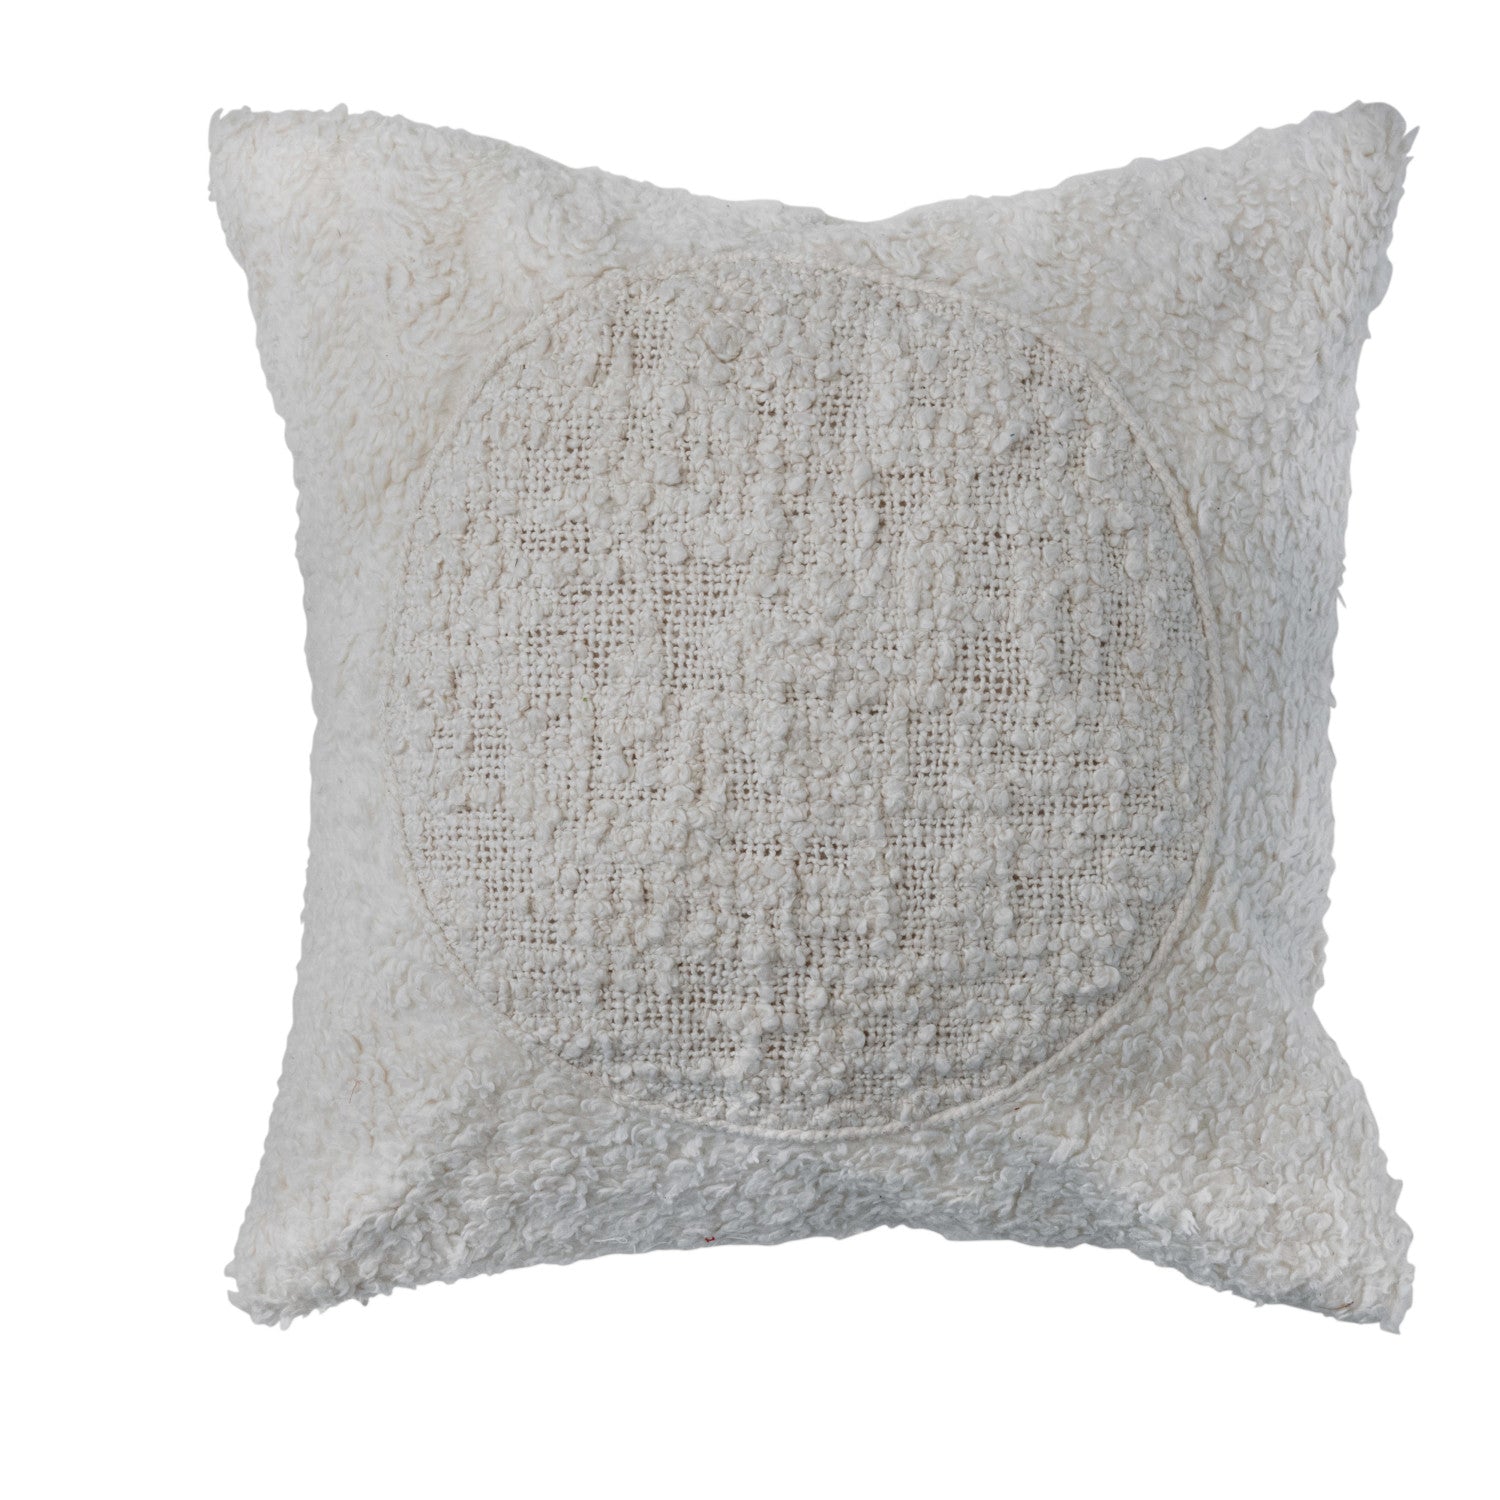 Sherpa Pillow w/ Embroidered Circle, Down Fill